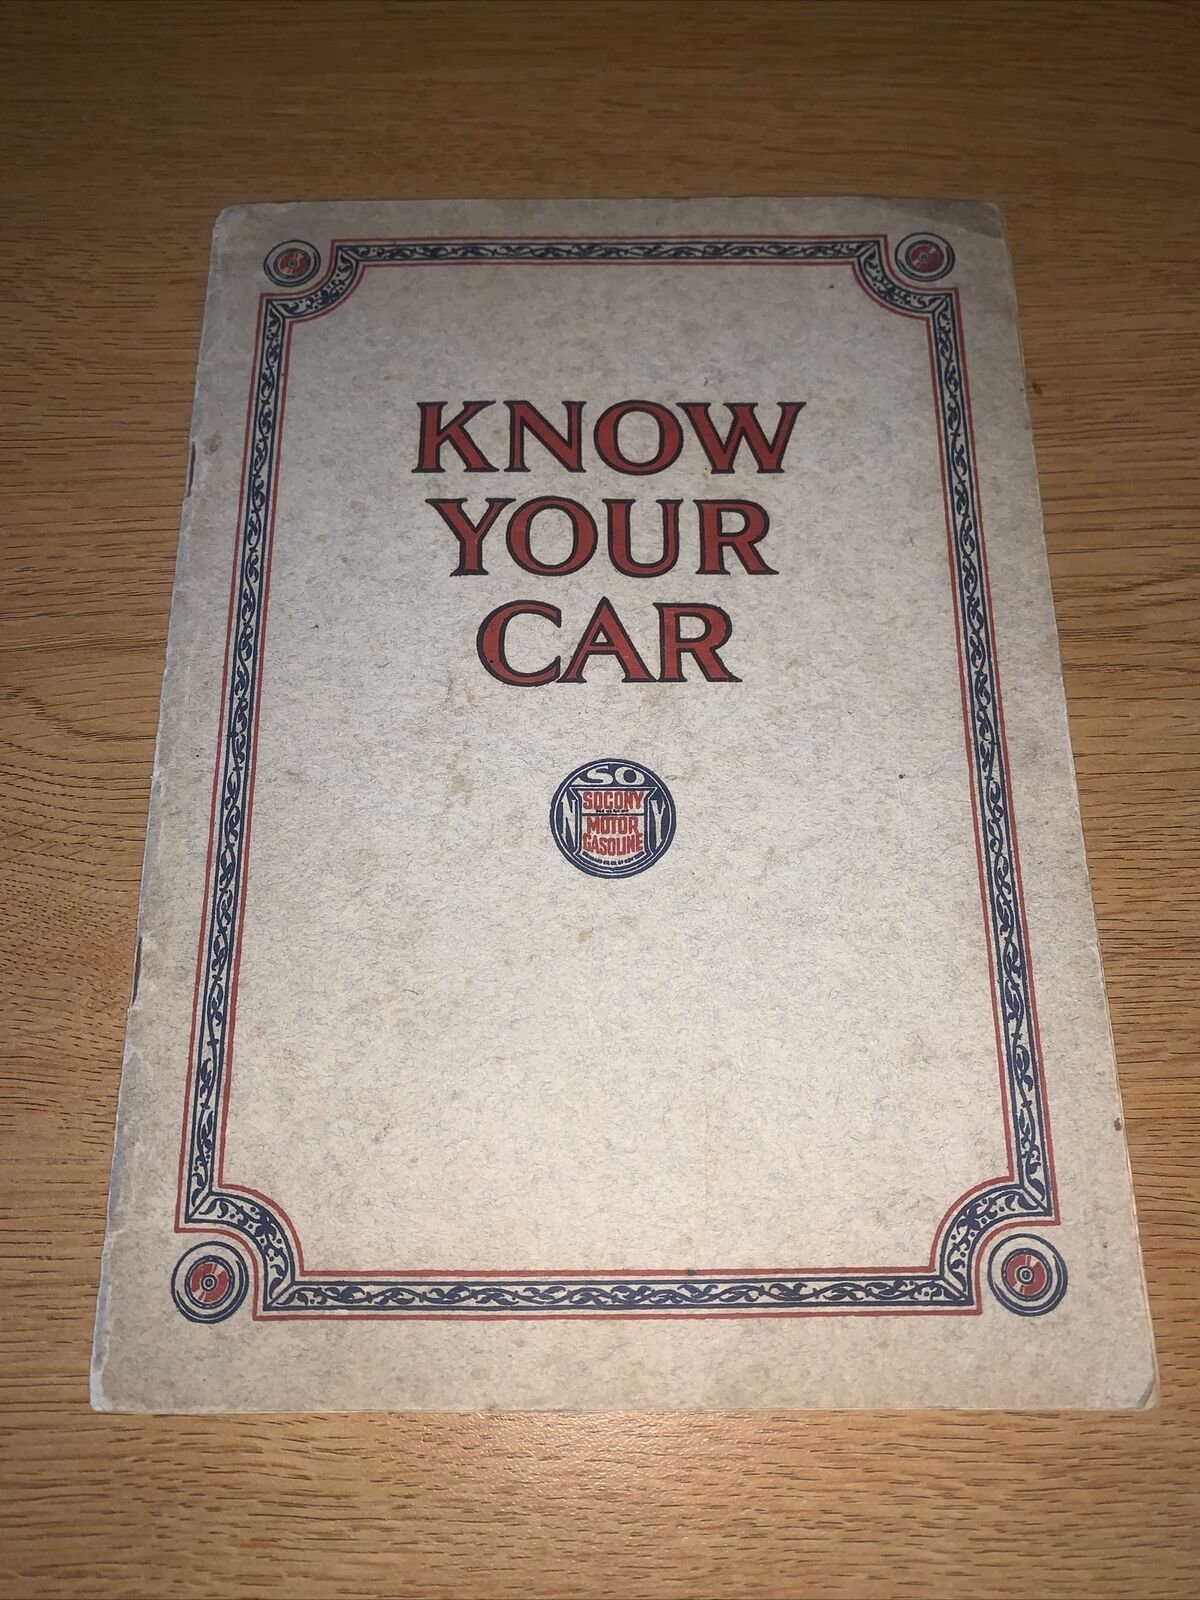 Socony Standard Oil Company Antique 1927 Know Your Car -booklet- Fragile